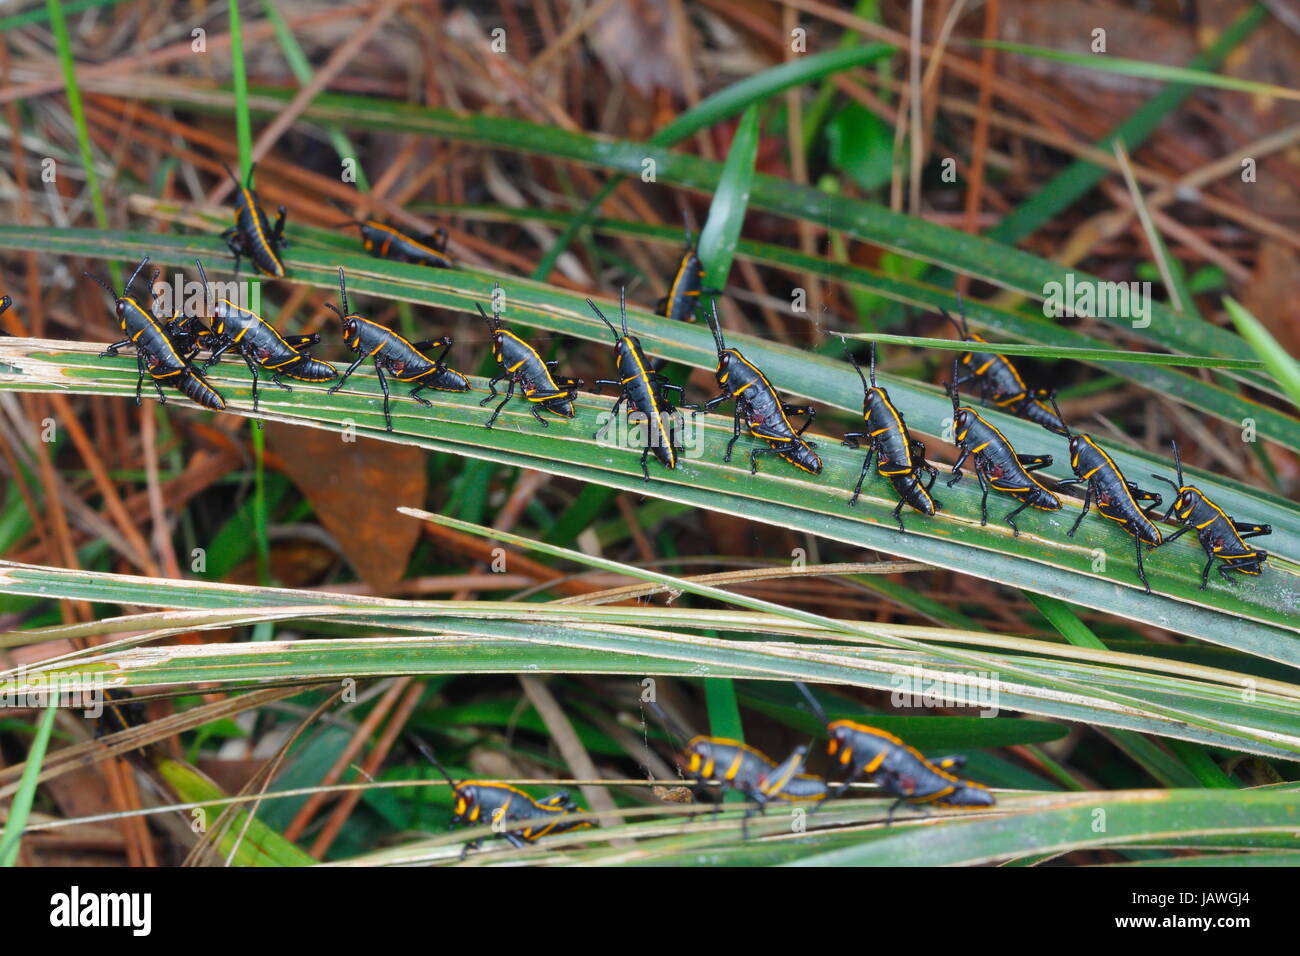 Lubber grasshopper nymphs, Romalia guttata, emerge from the ground in large groups. Stock Photo